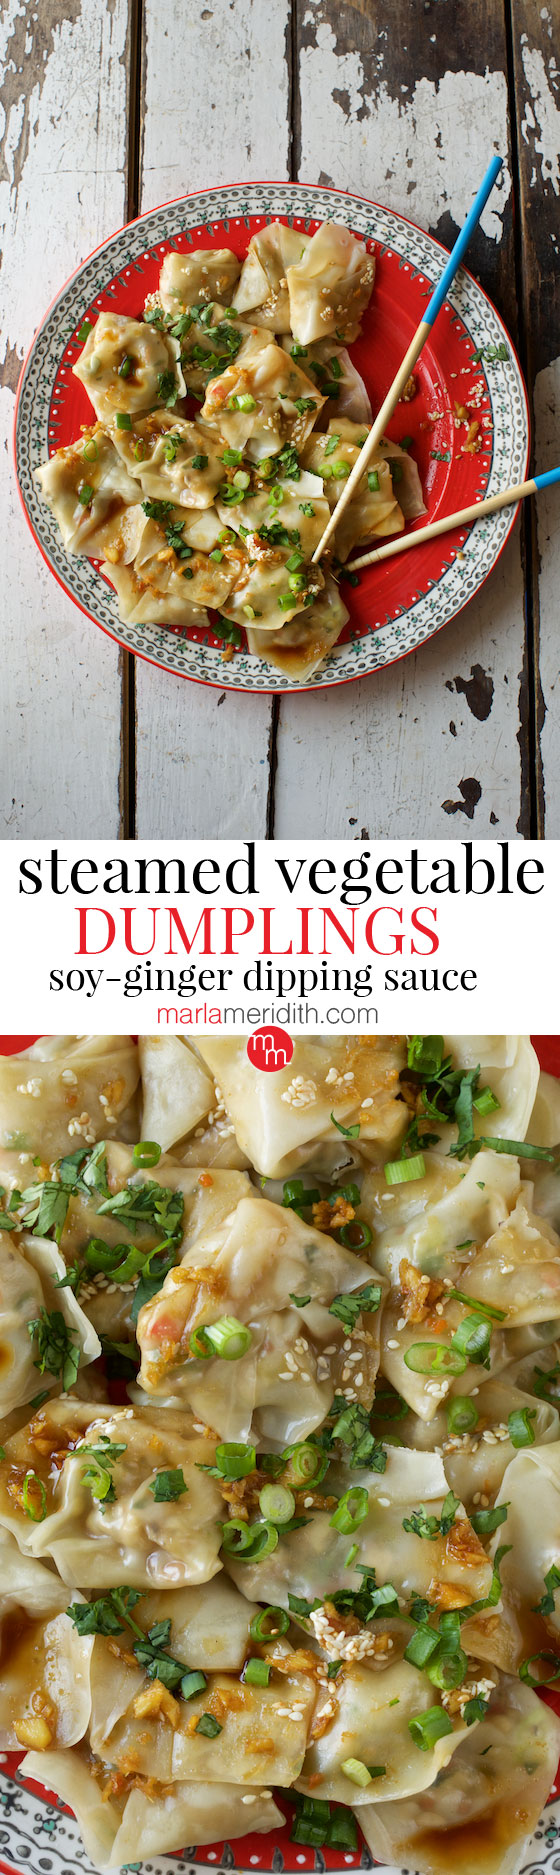 Steamed Vegetable Dumplings with Ginger-Soy Dipping Sauce recipe. Forget the take-out, these are way better! MarlaMeridith.com ( @marlameridith )